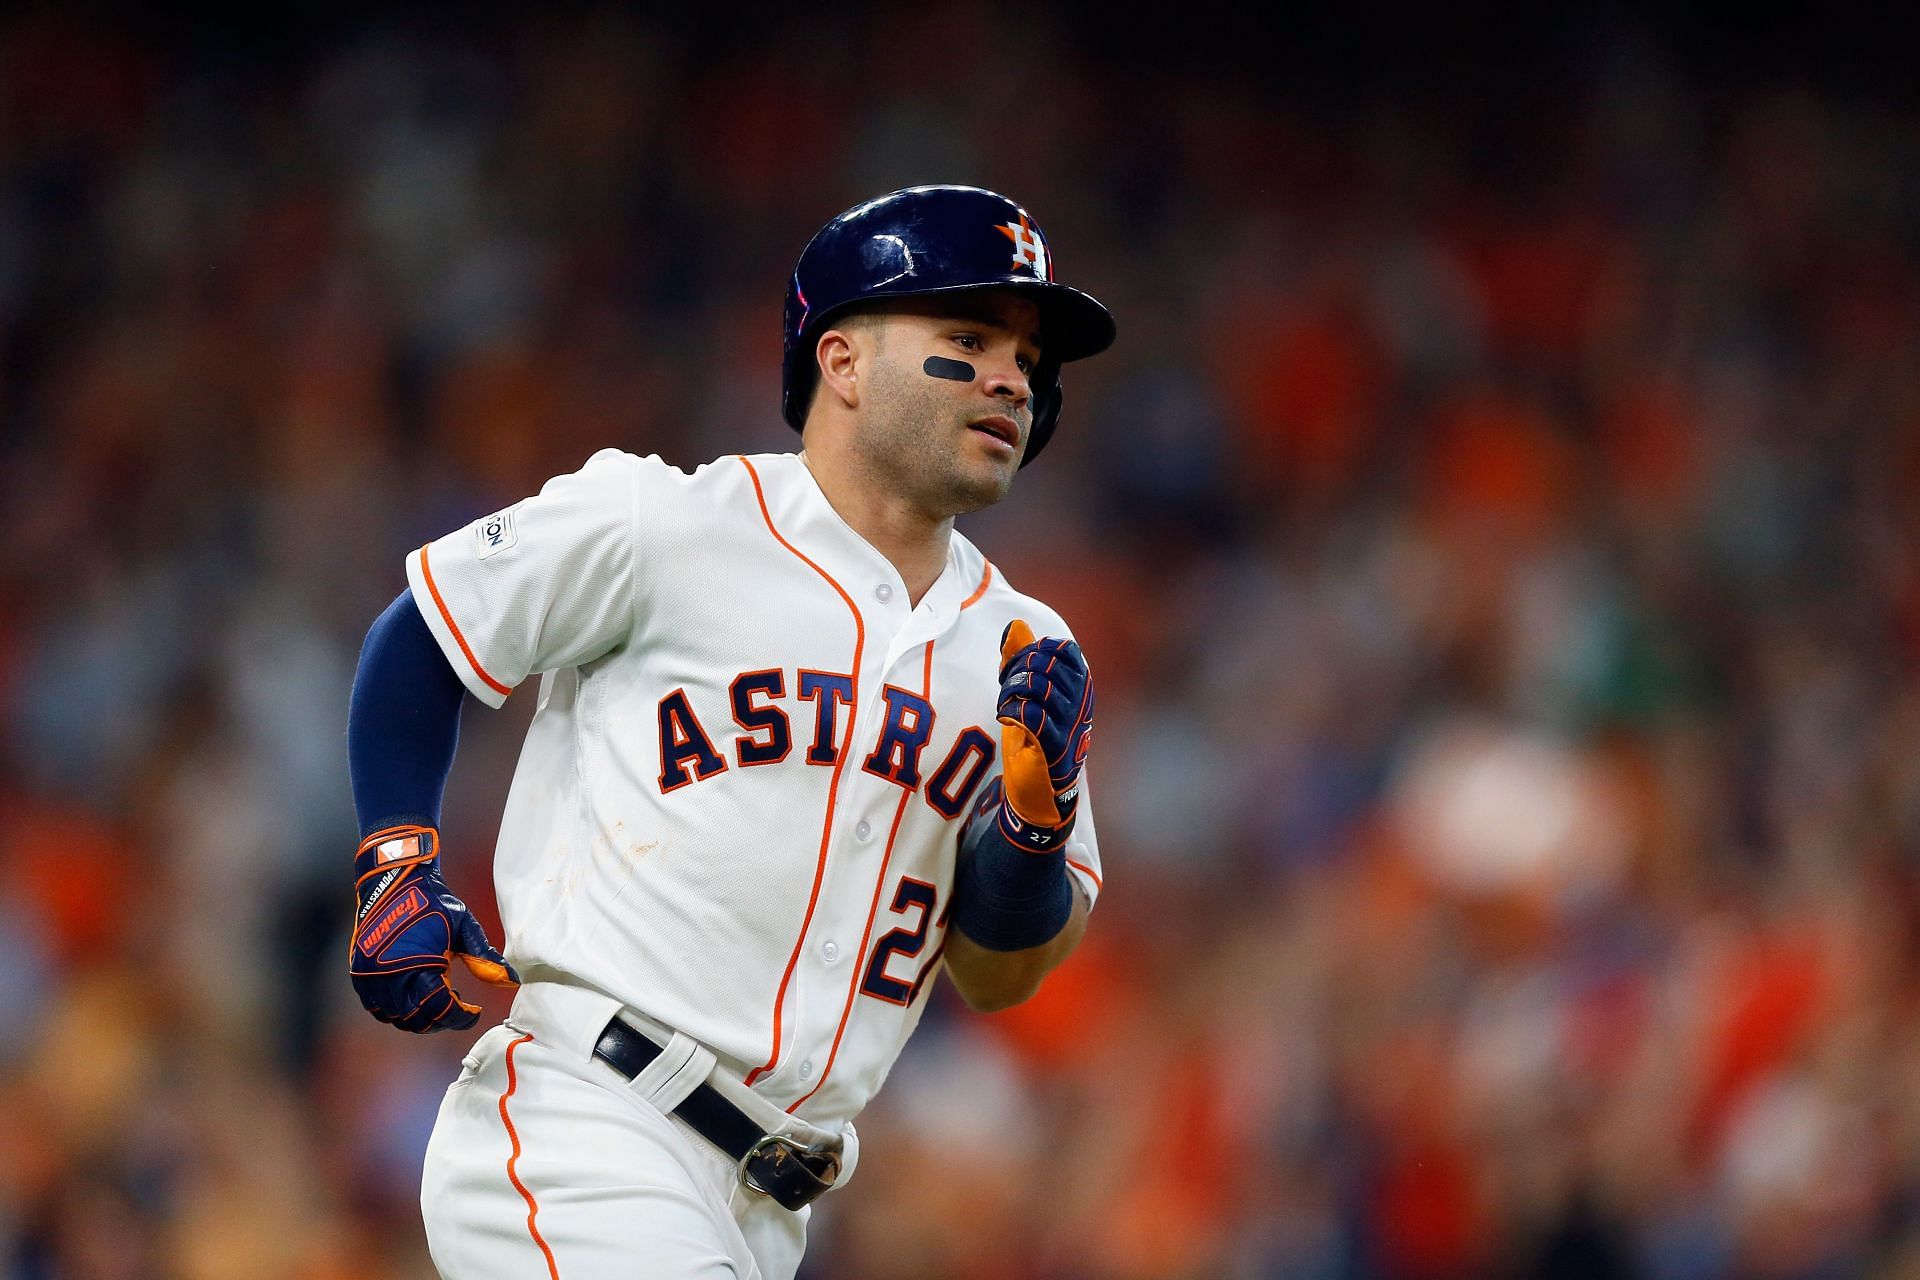 Whether You Like It Or Not, Jose Altuve Is Already A Hall Of Famer